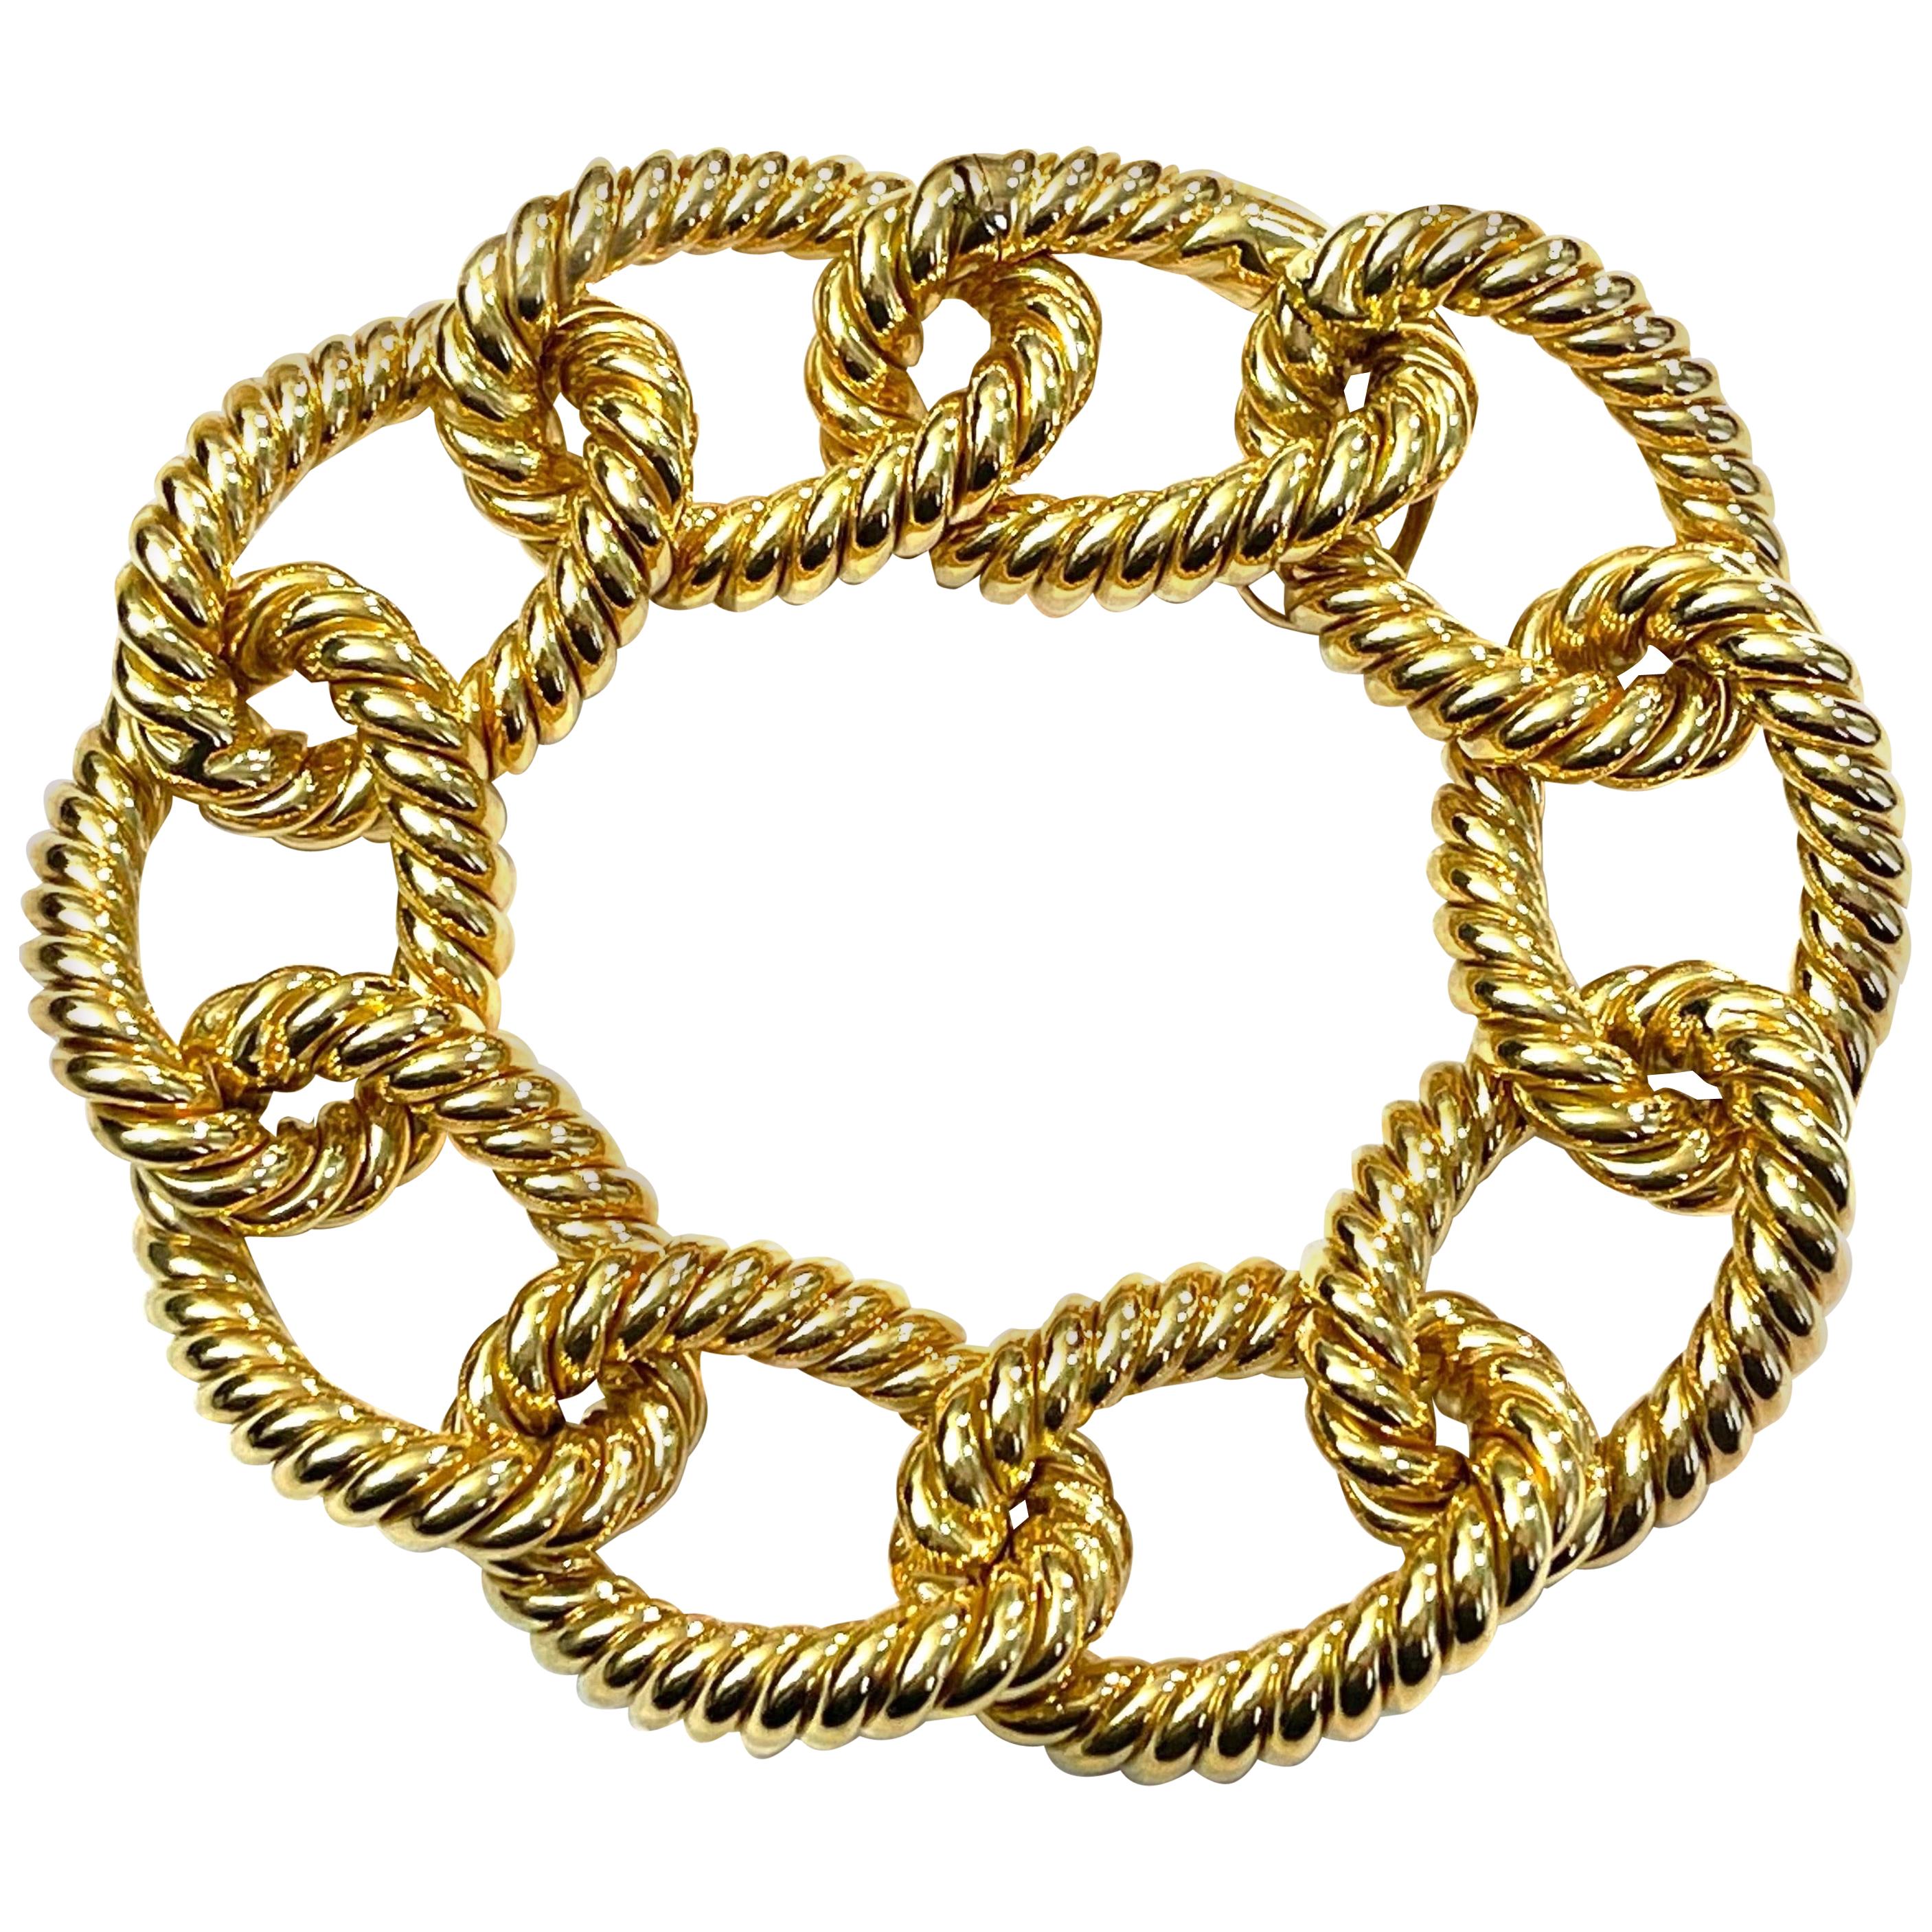 Bracelet from the Collection "Rope" 18 Karat Yellow Gold